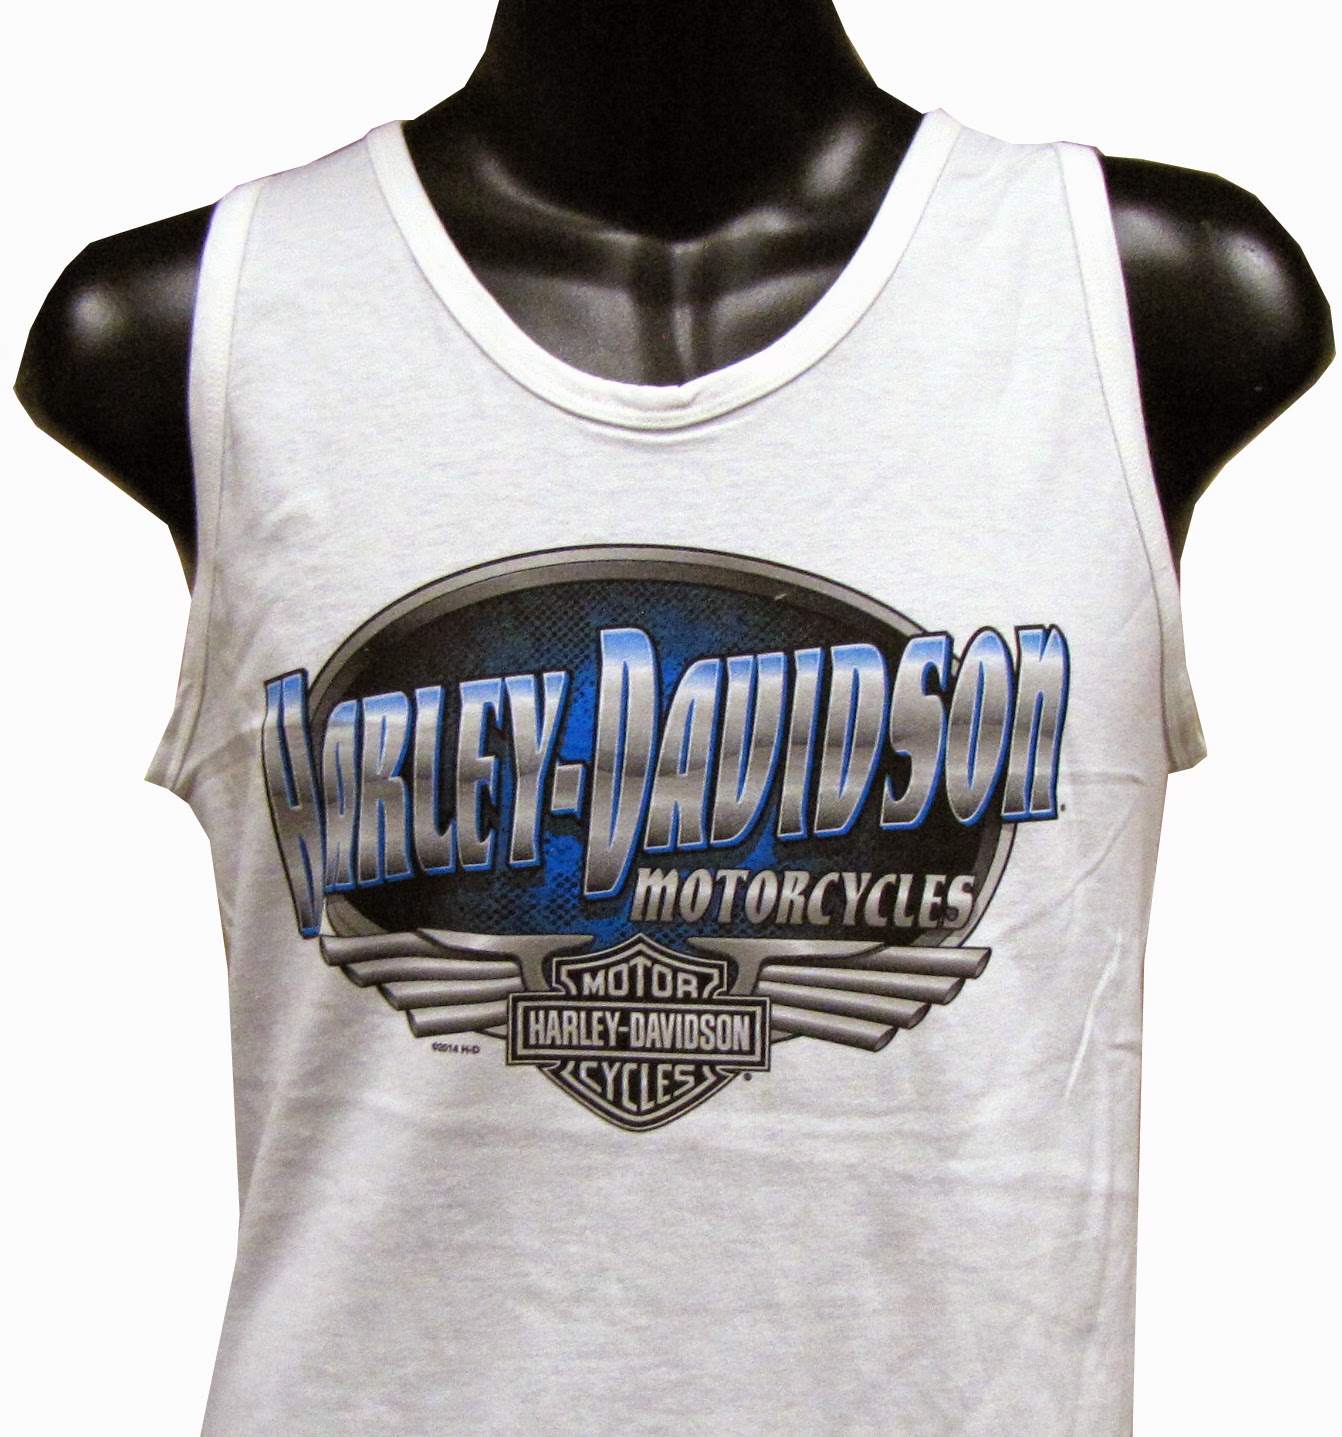 Adventure Harley-Davidson: New Miss Me® Jeans, New H-D® Shirts and More!